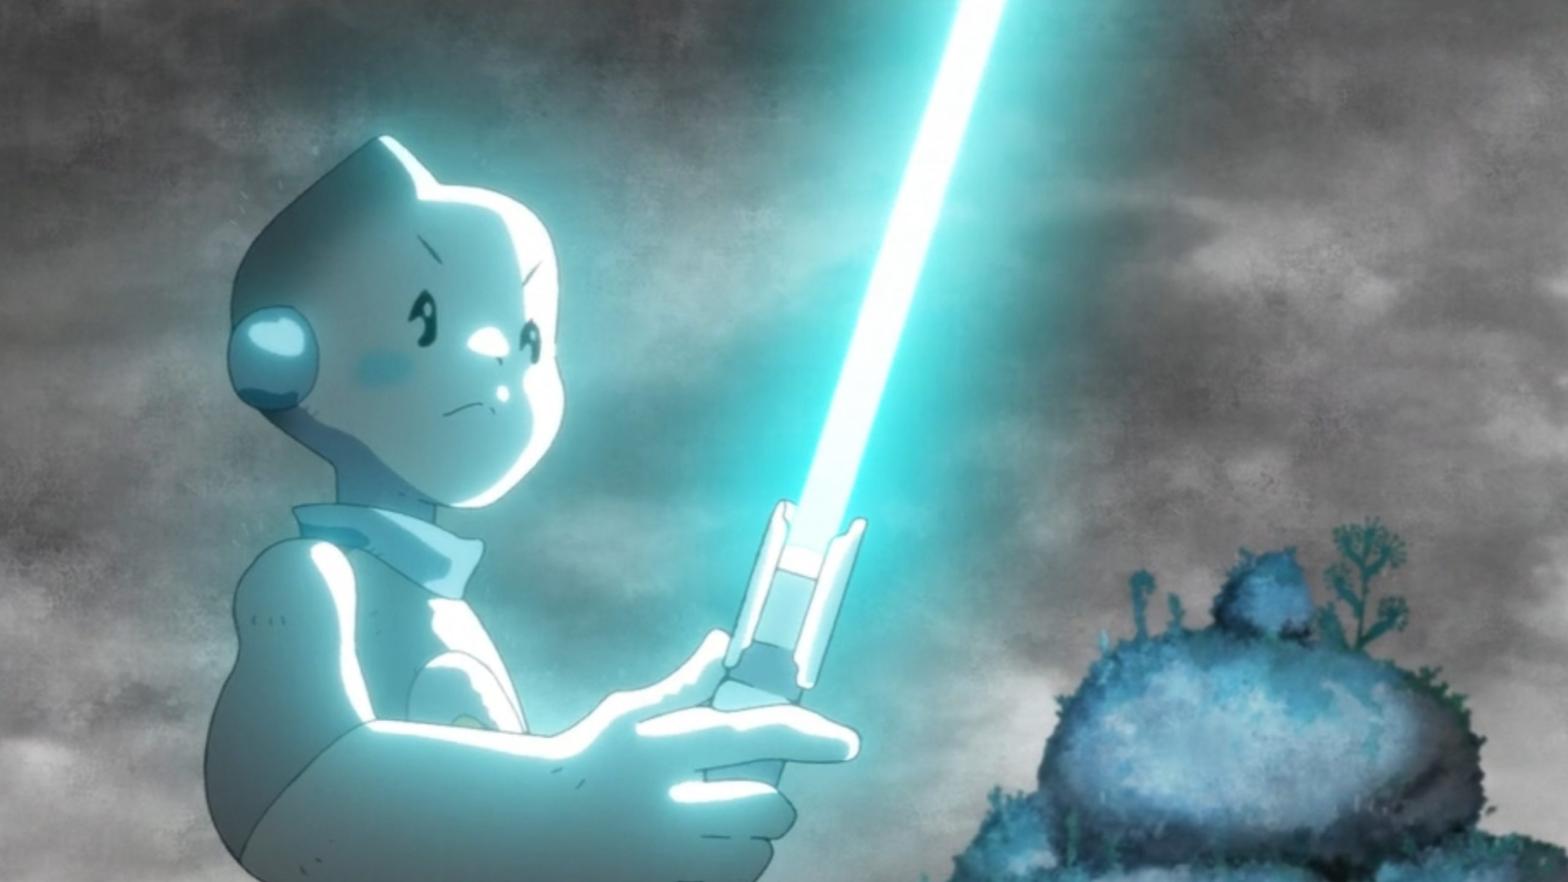 Astro Boy with a lightsaber? Don't mind if I do! (Screenshot: Disney+)